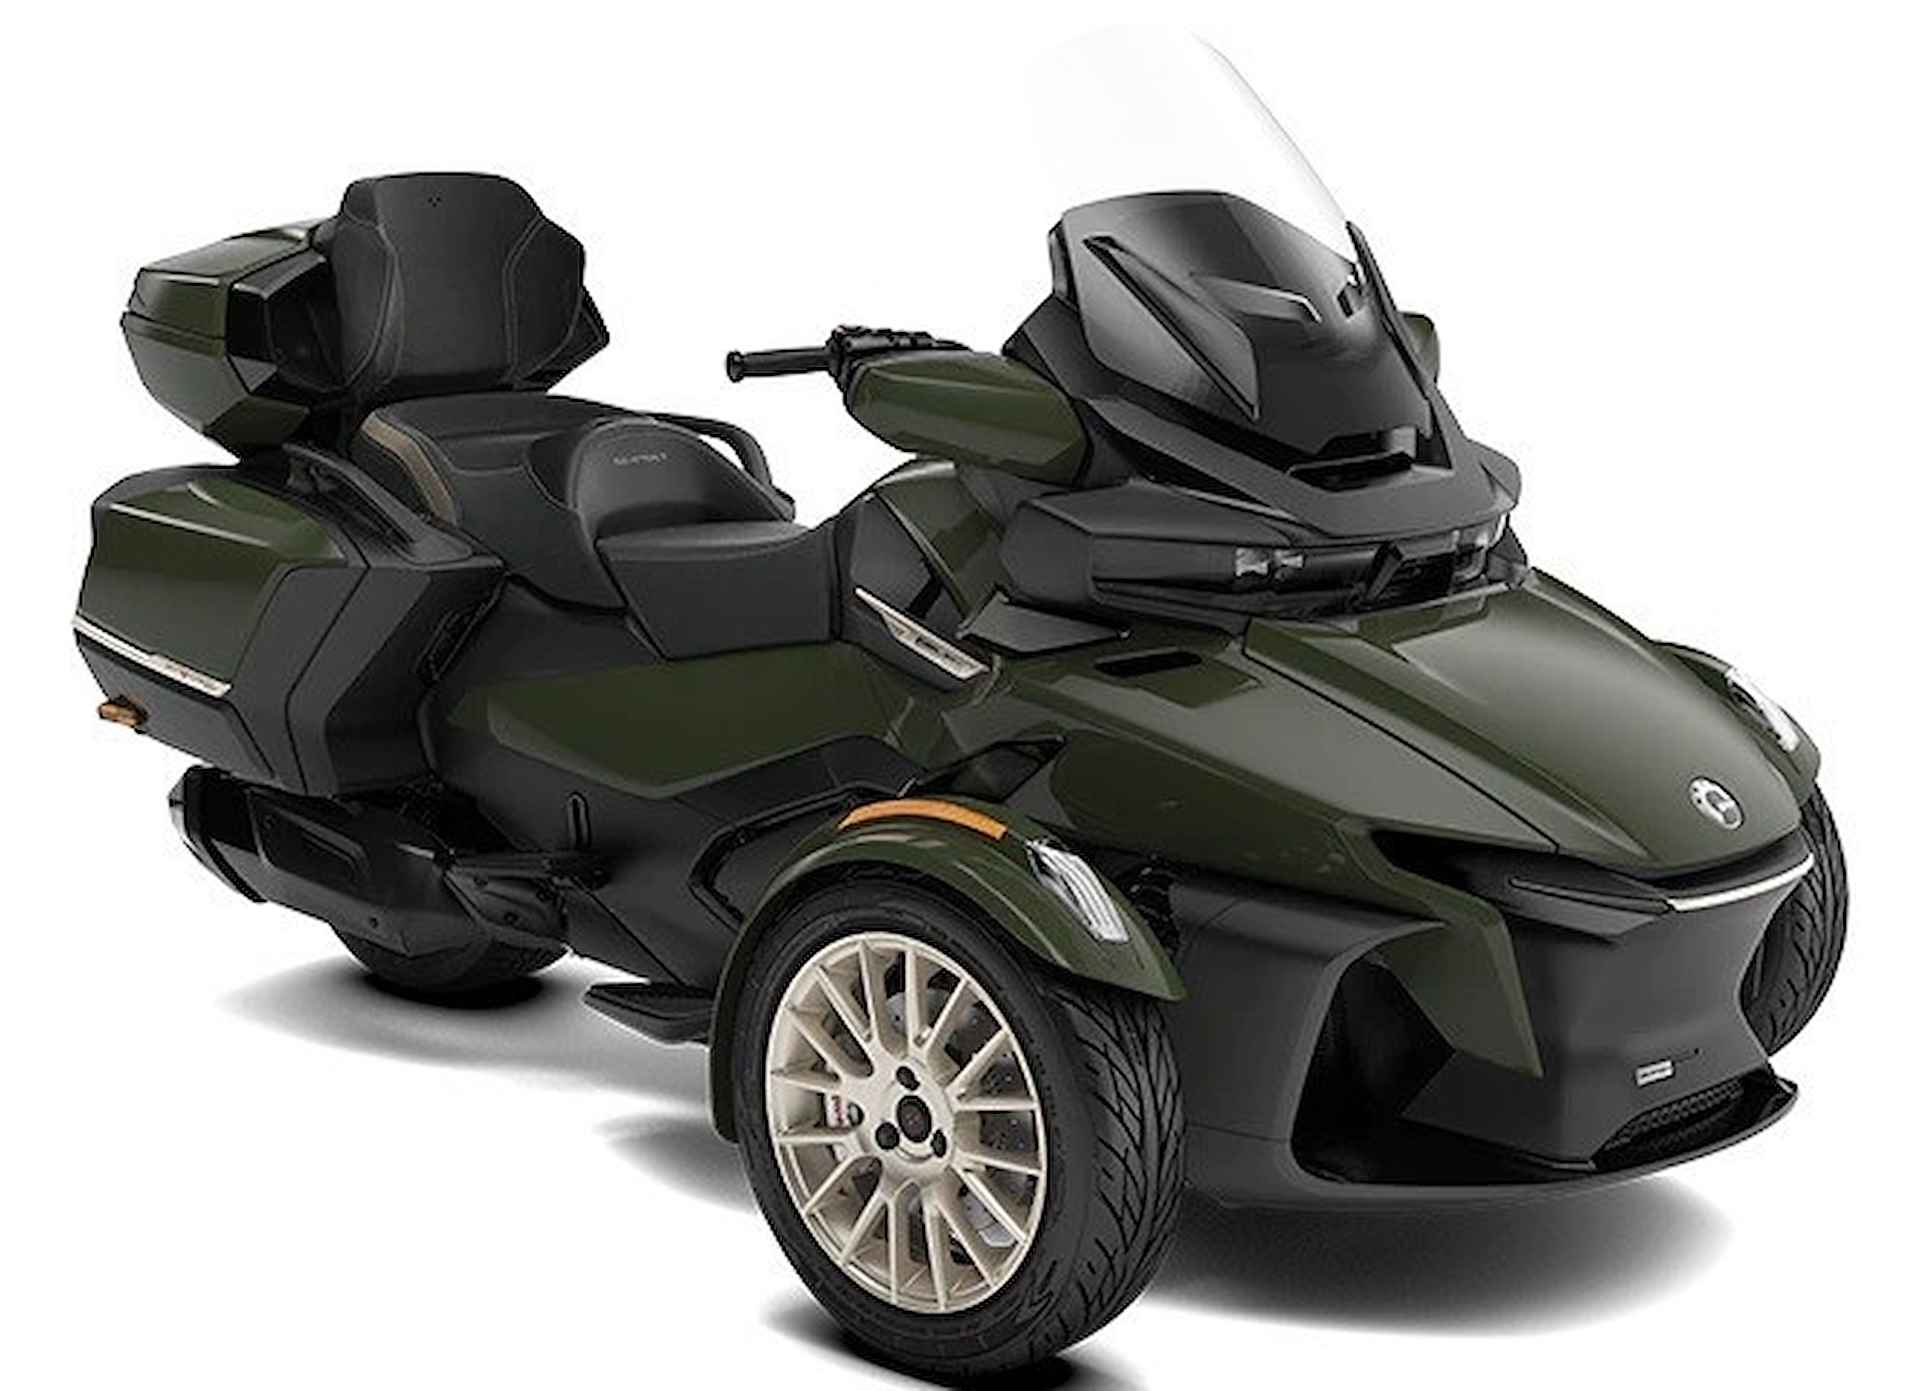 CAN-AM SPYDER RT LIMITED SEA TO SKY NU 1800.- KORTING OP CAN AM - 1/1